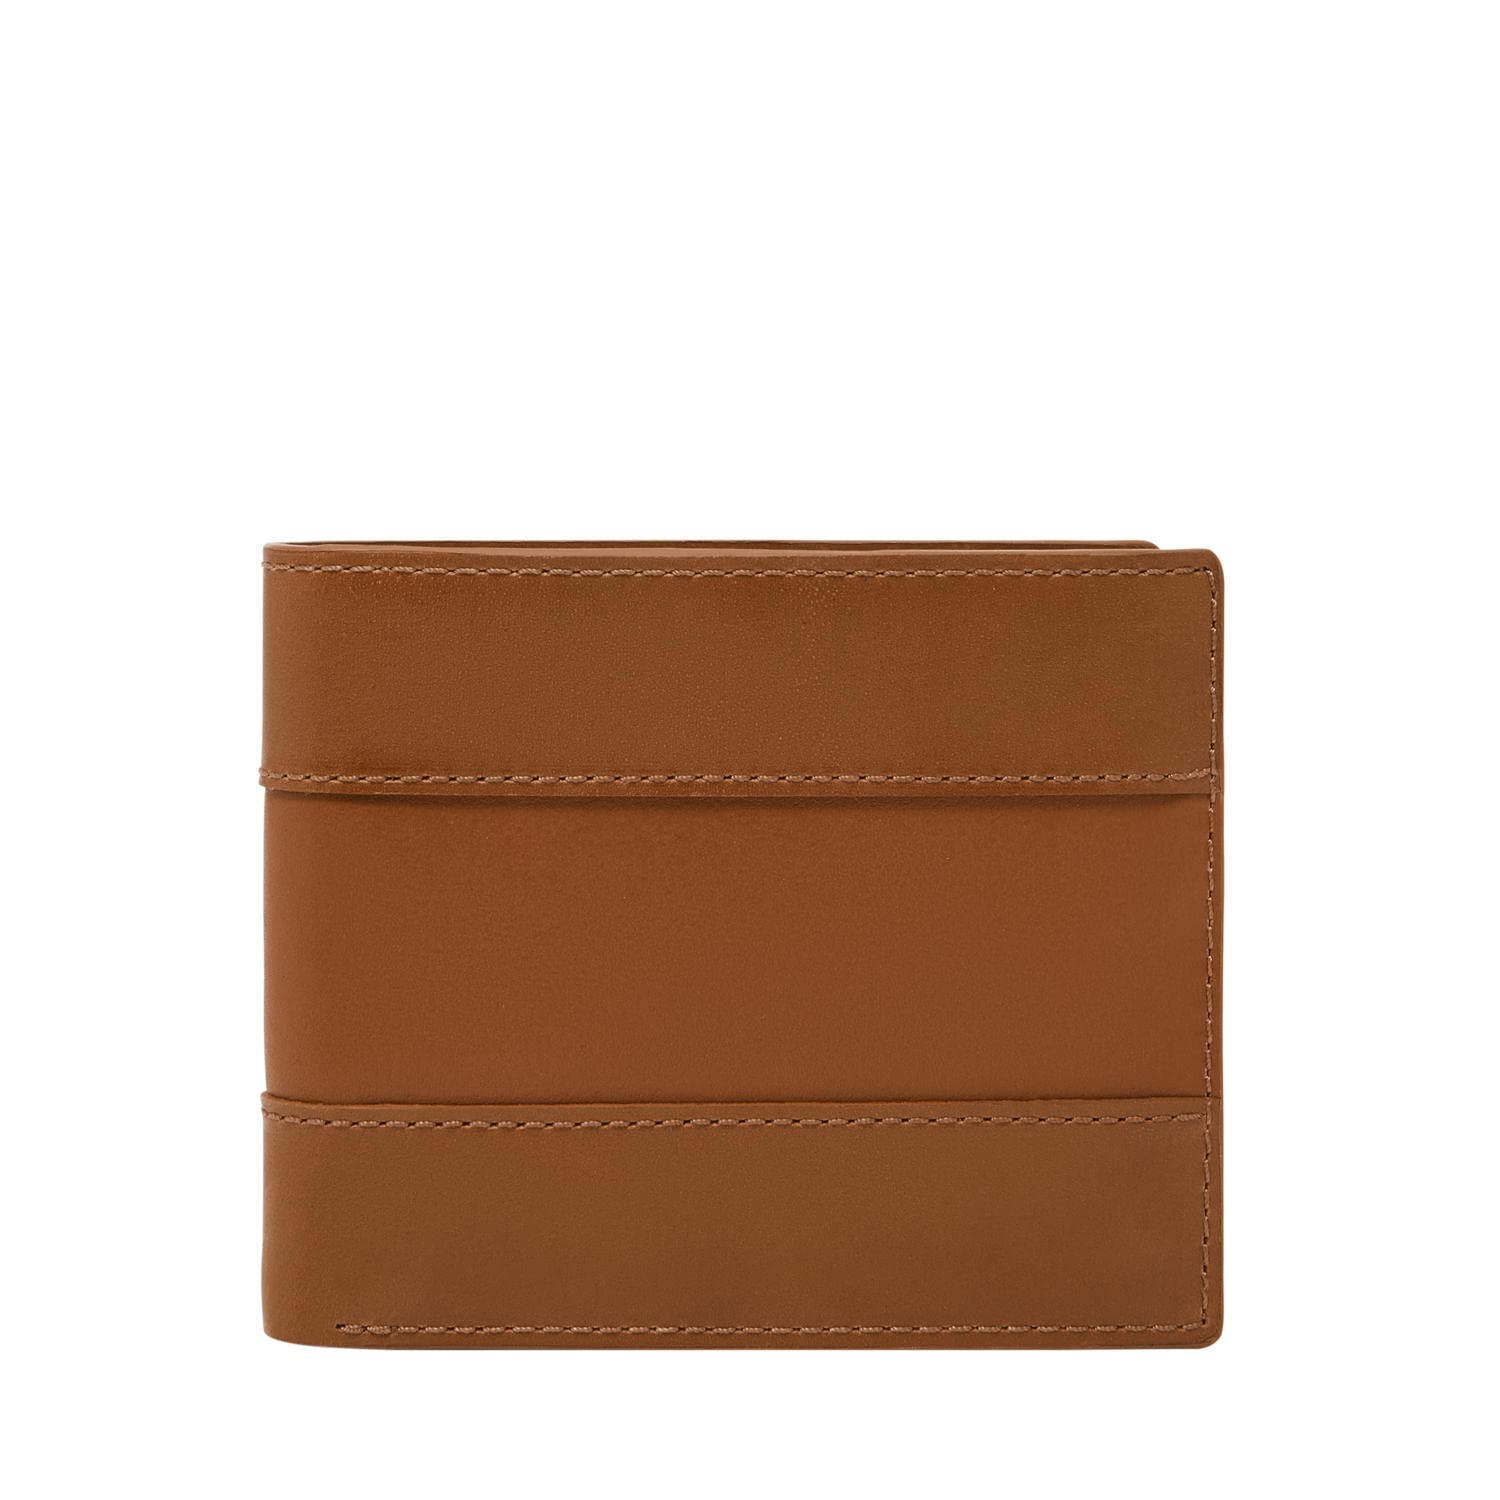 Fossil Men's Leather Bifold Wallet with Flip ID Window (Everett Saddle) $19.50 + Free Shipping w/ Prime or on $35+